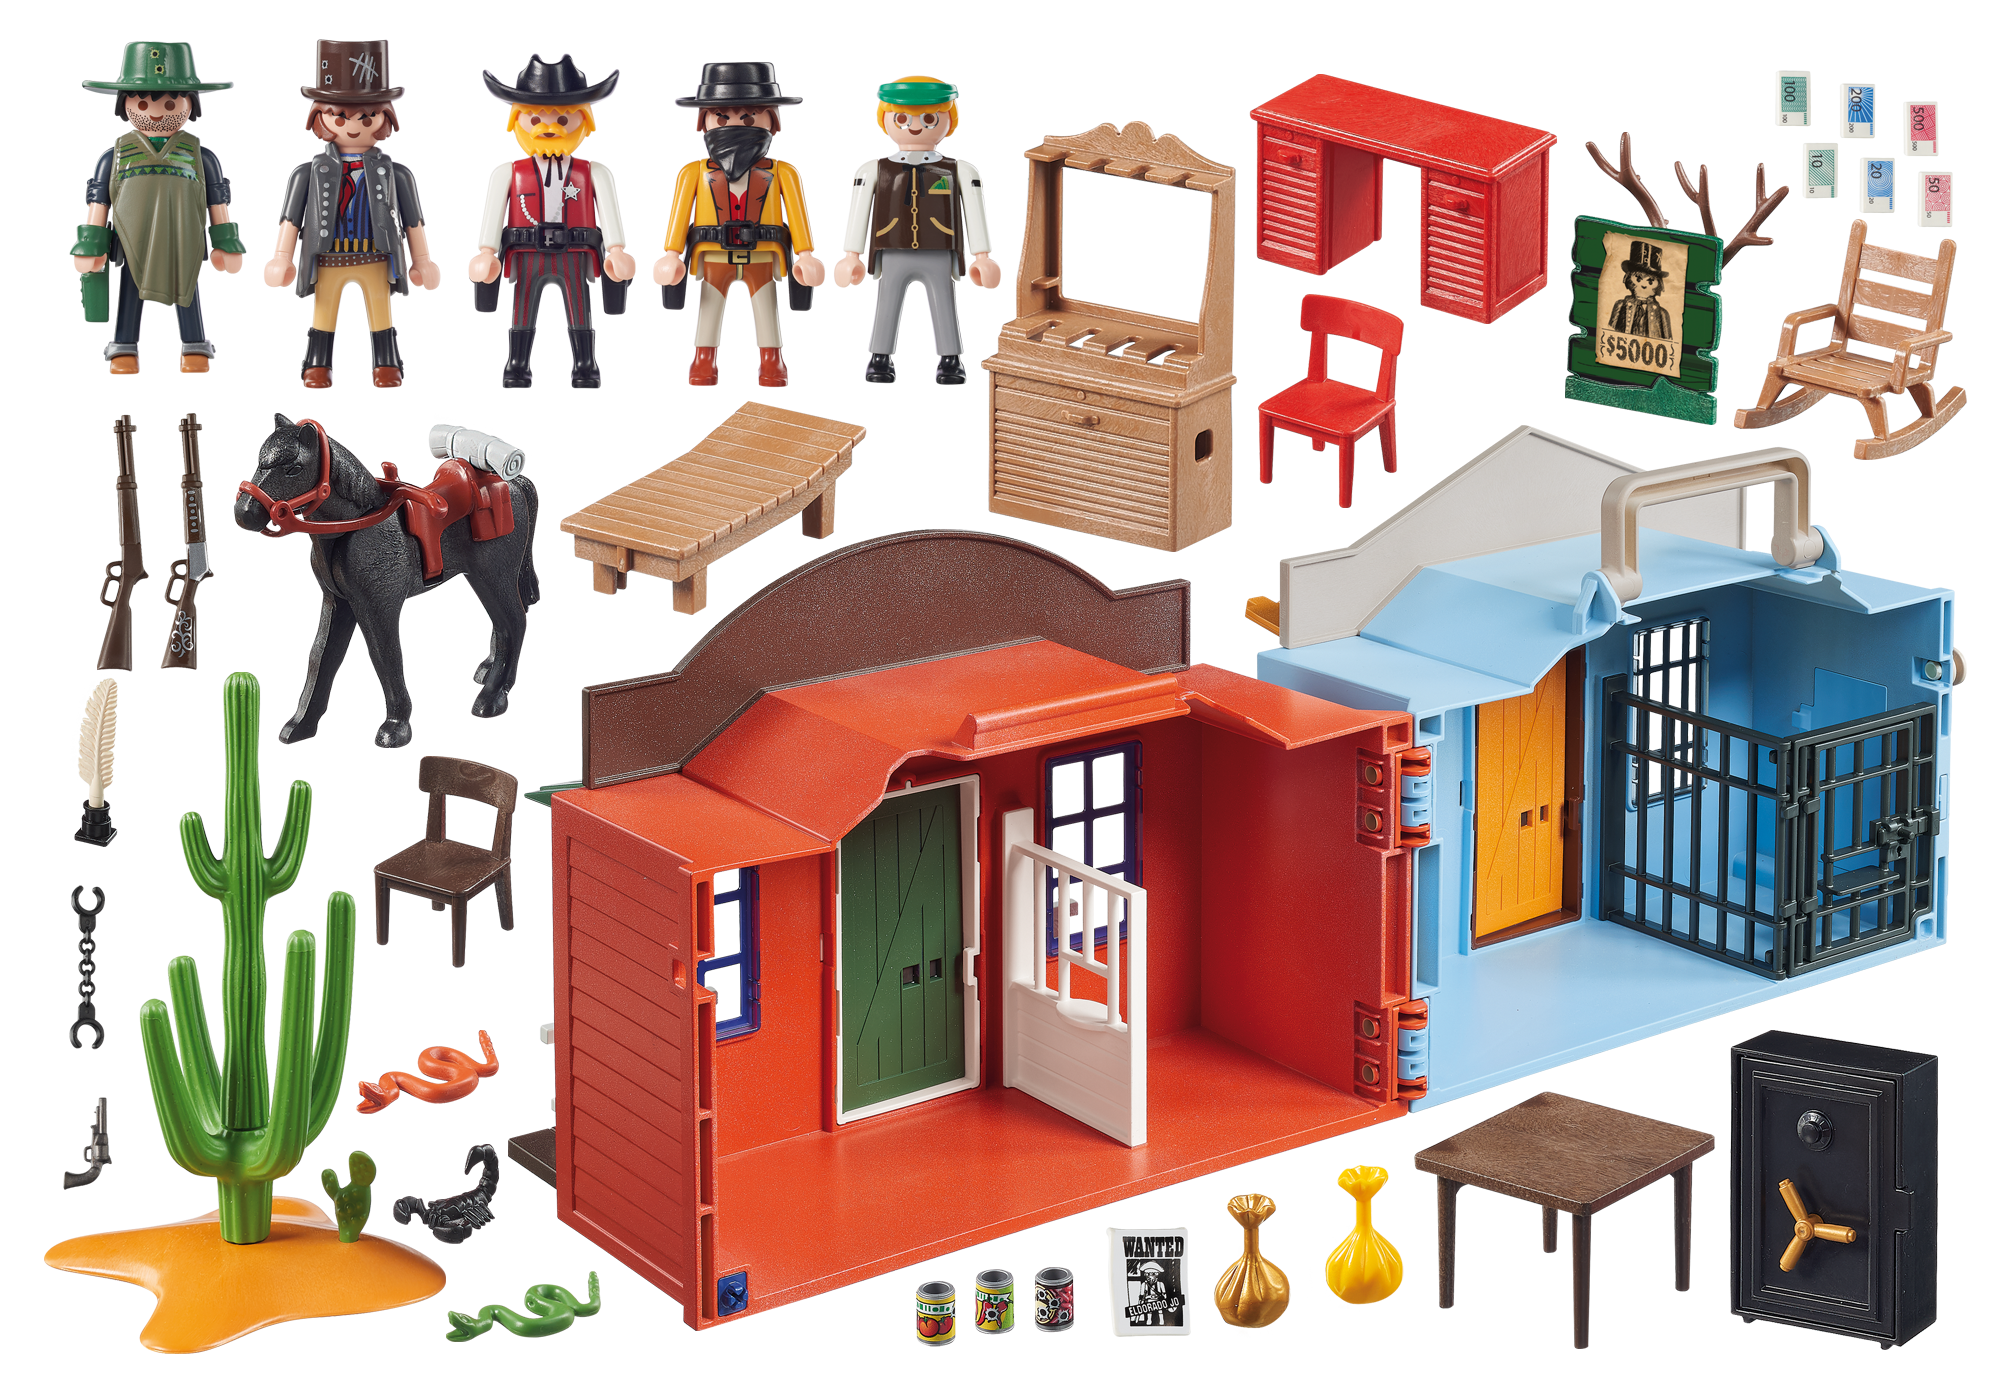 playmobil banque western